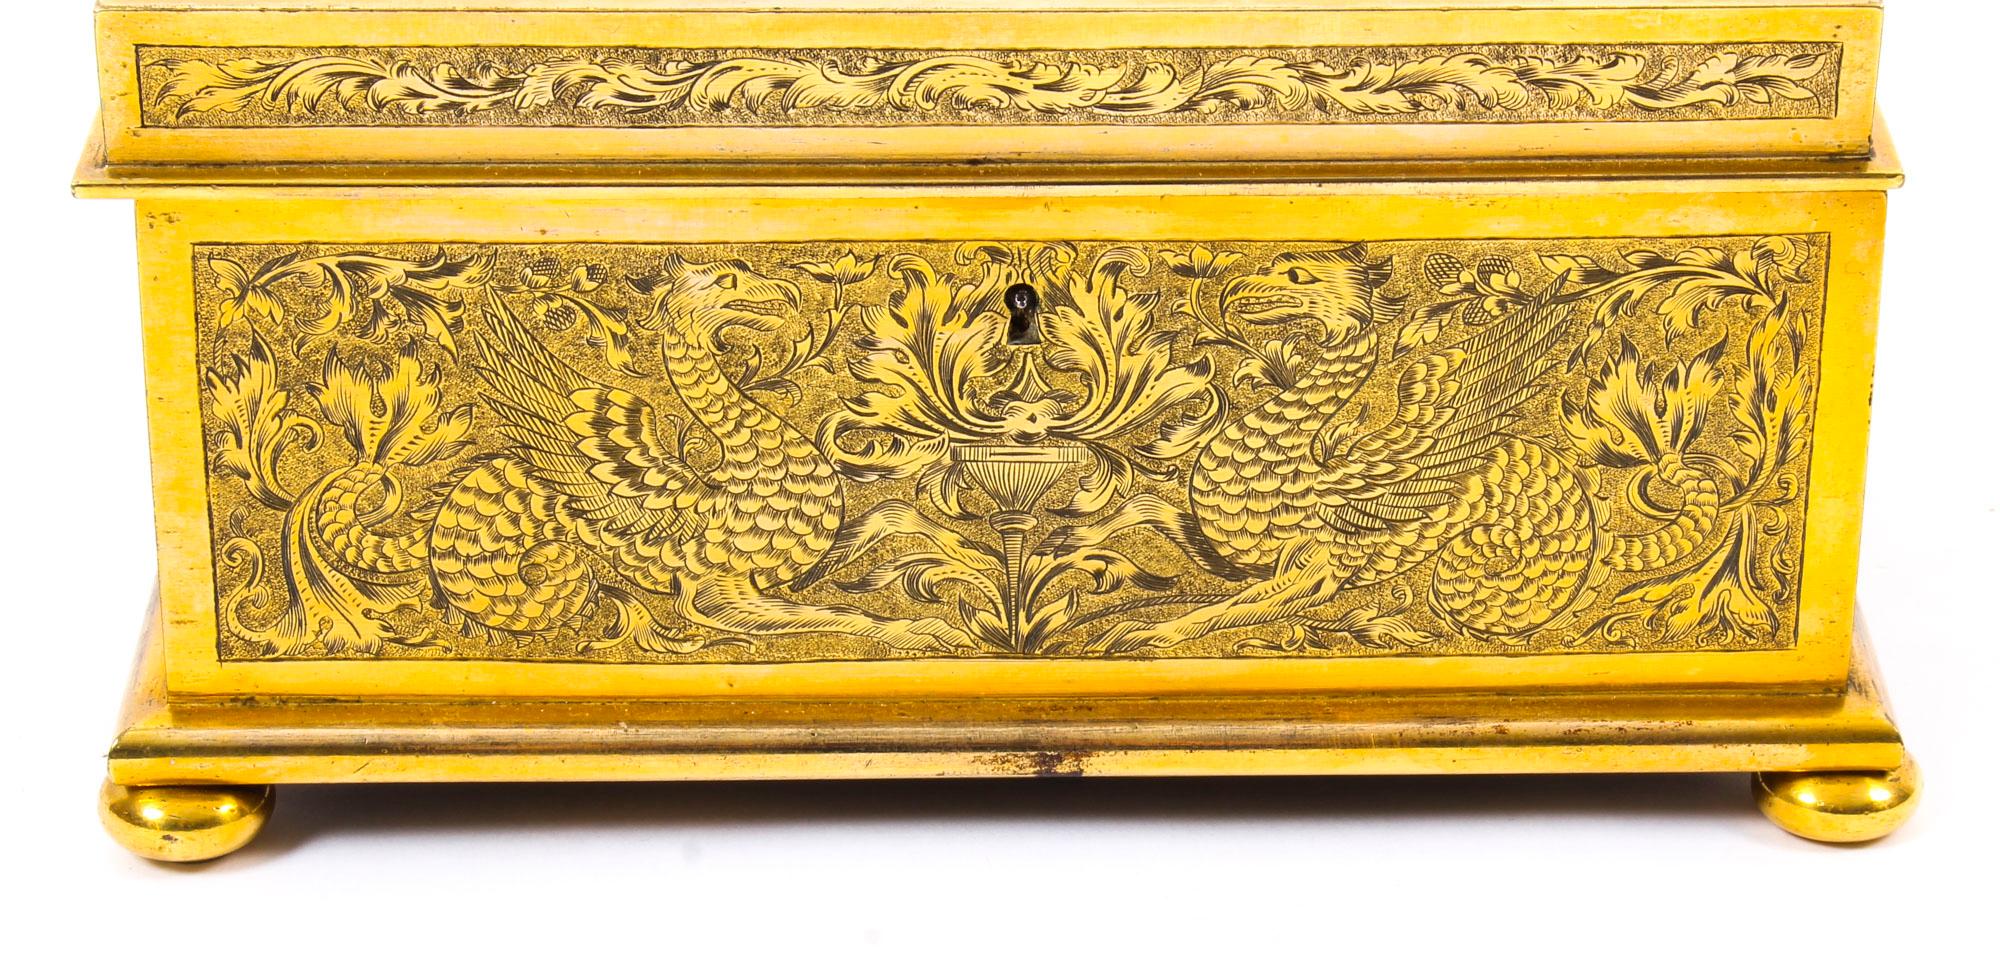 Mid-19th Century Ormolu Sevres Jewel Casket Exhibited at the Great Exhibition 1851, 19th Century